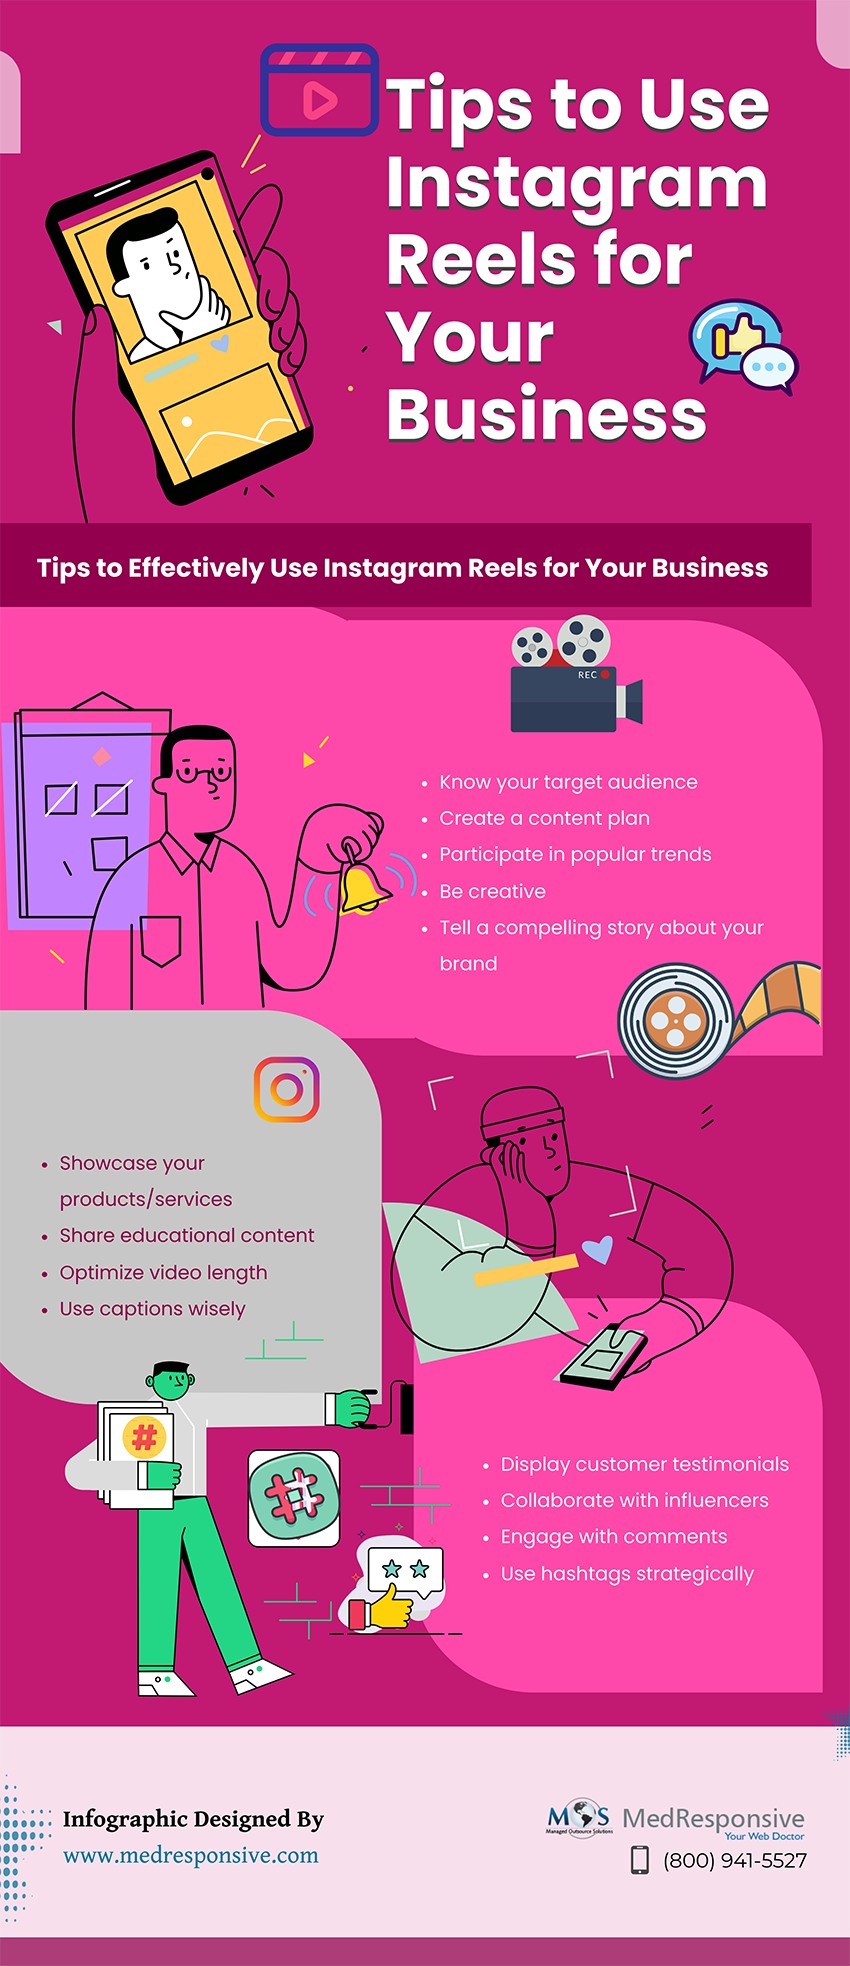 Tips to Use Instagram Reels for Your Business